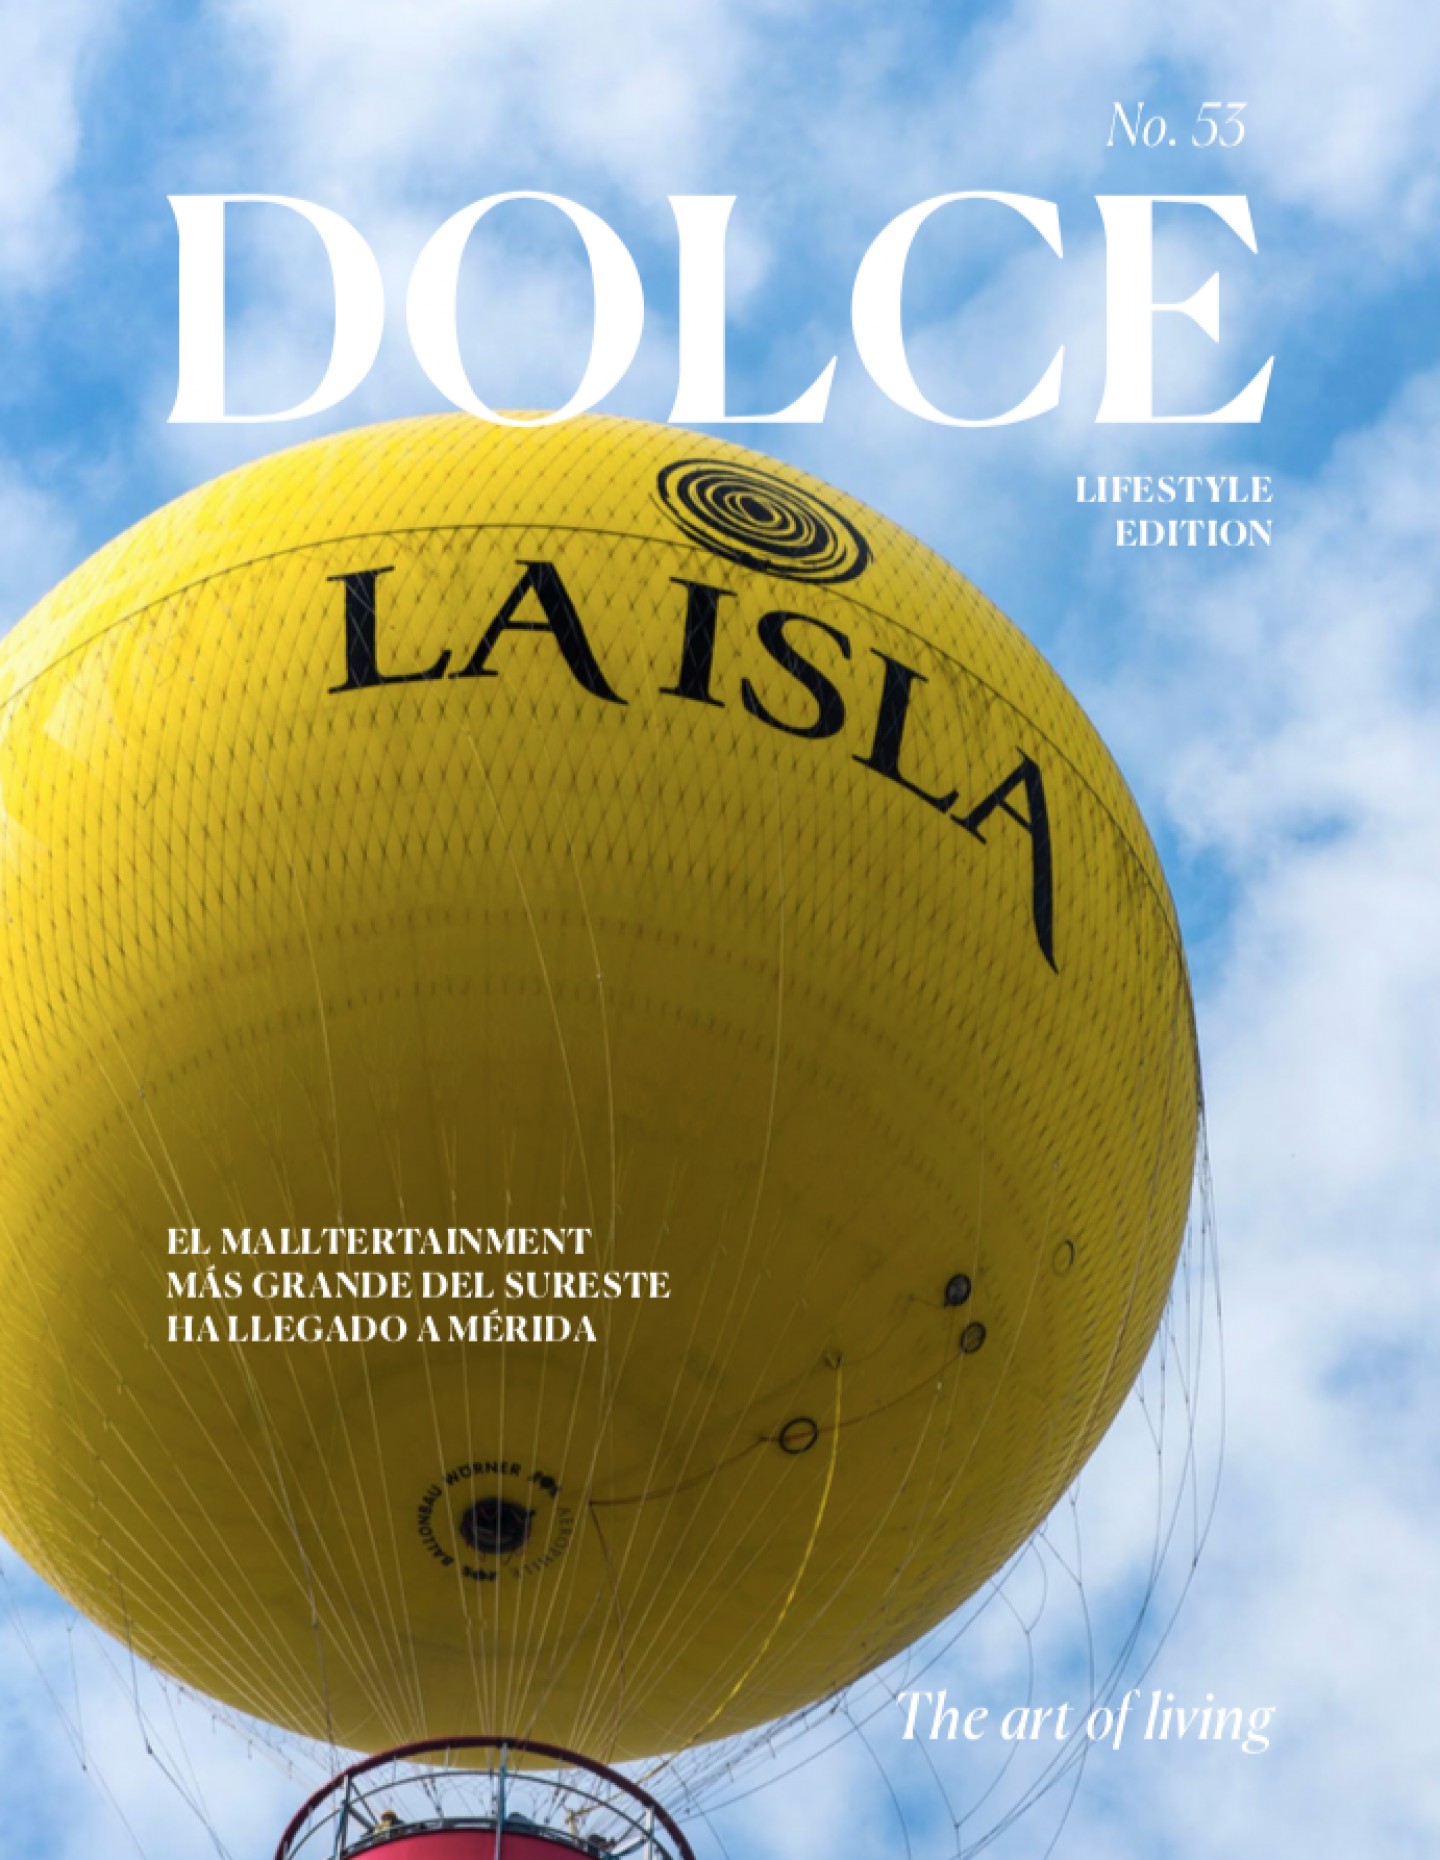 dolce 53